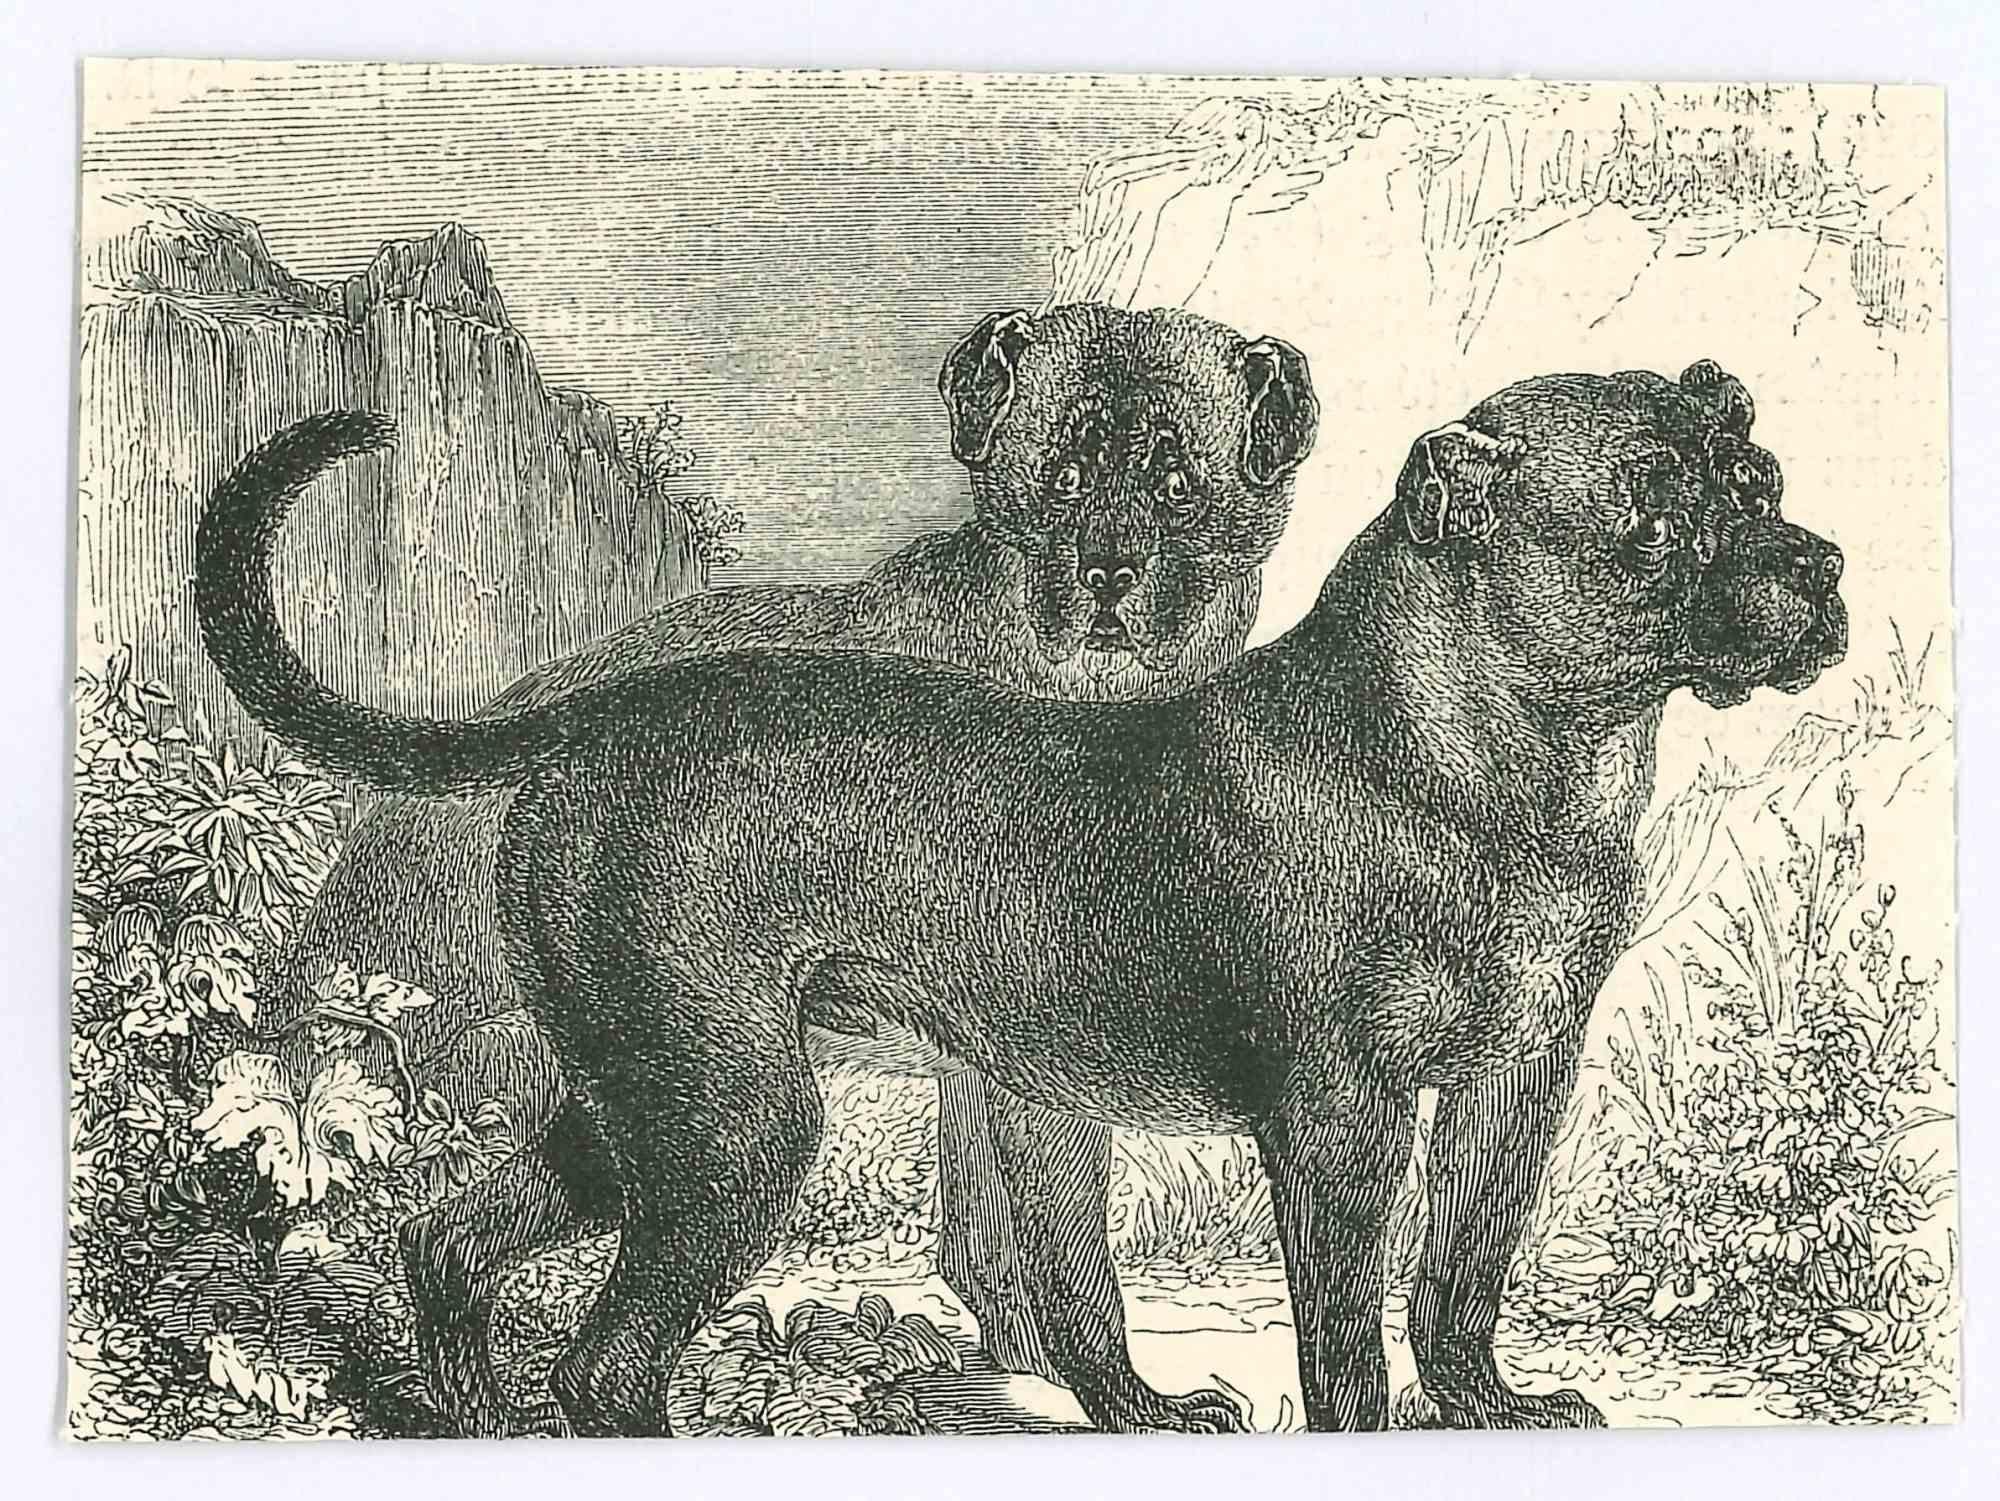 The Dogs is an original lithograph on ivory-colored paper, realized by Paul Gervais (1816-1879). The artwork is from The Series of "Les Trois Règnes de la Nature", and was published in 1854.

Good conditions.

Titled on the lower. With the notes on